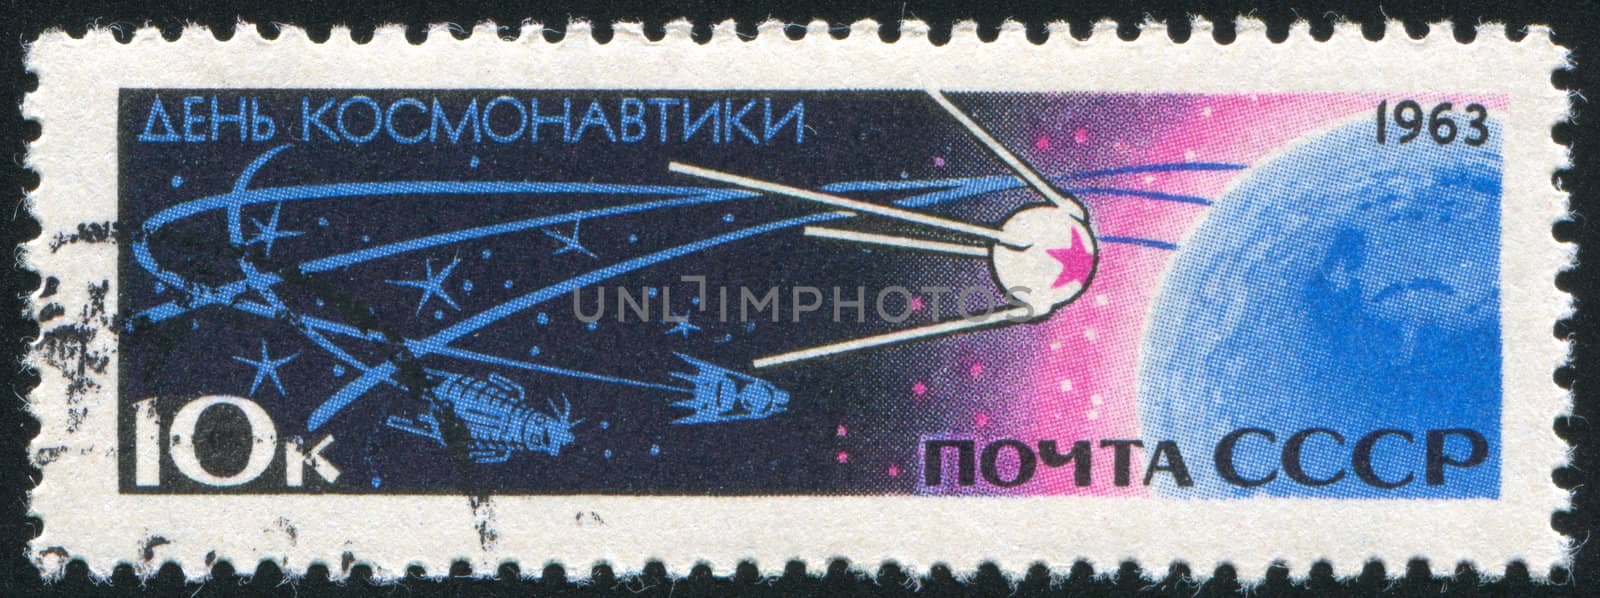 RUSSIA - CIRCA 1963: stamp printed by Russia, shows Sputnik and Earth, circa 1963